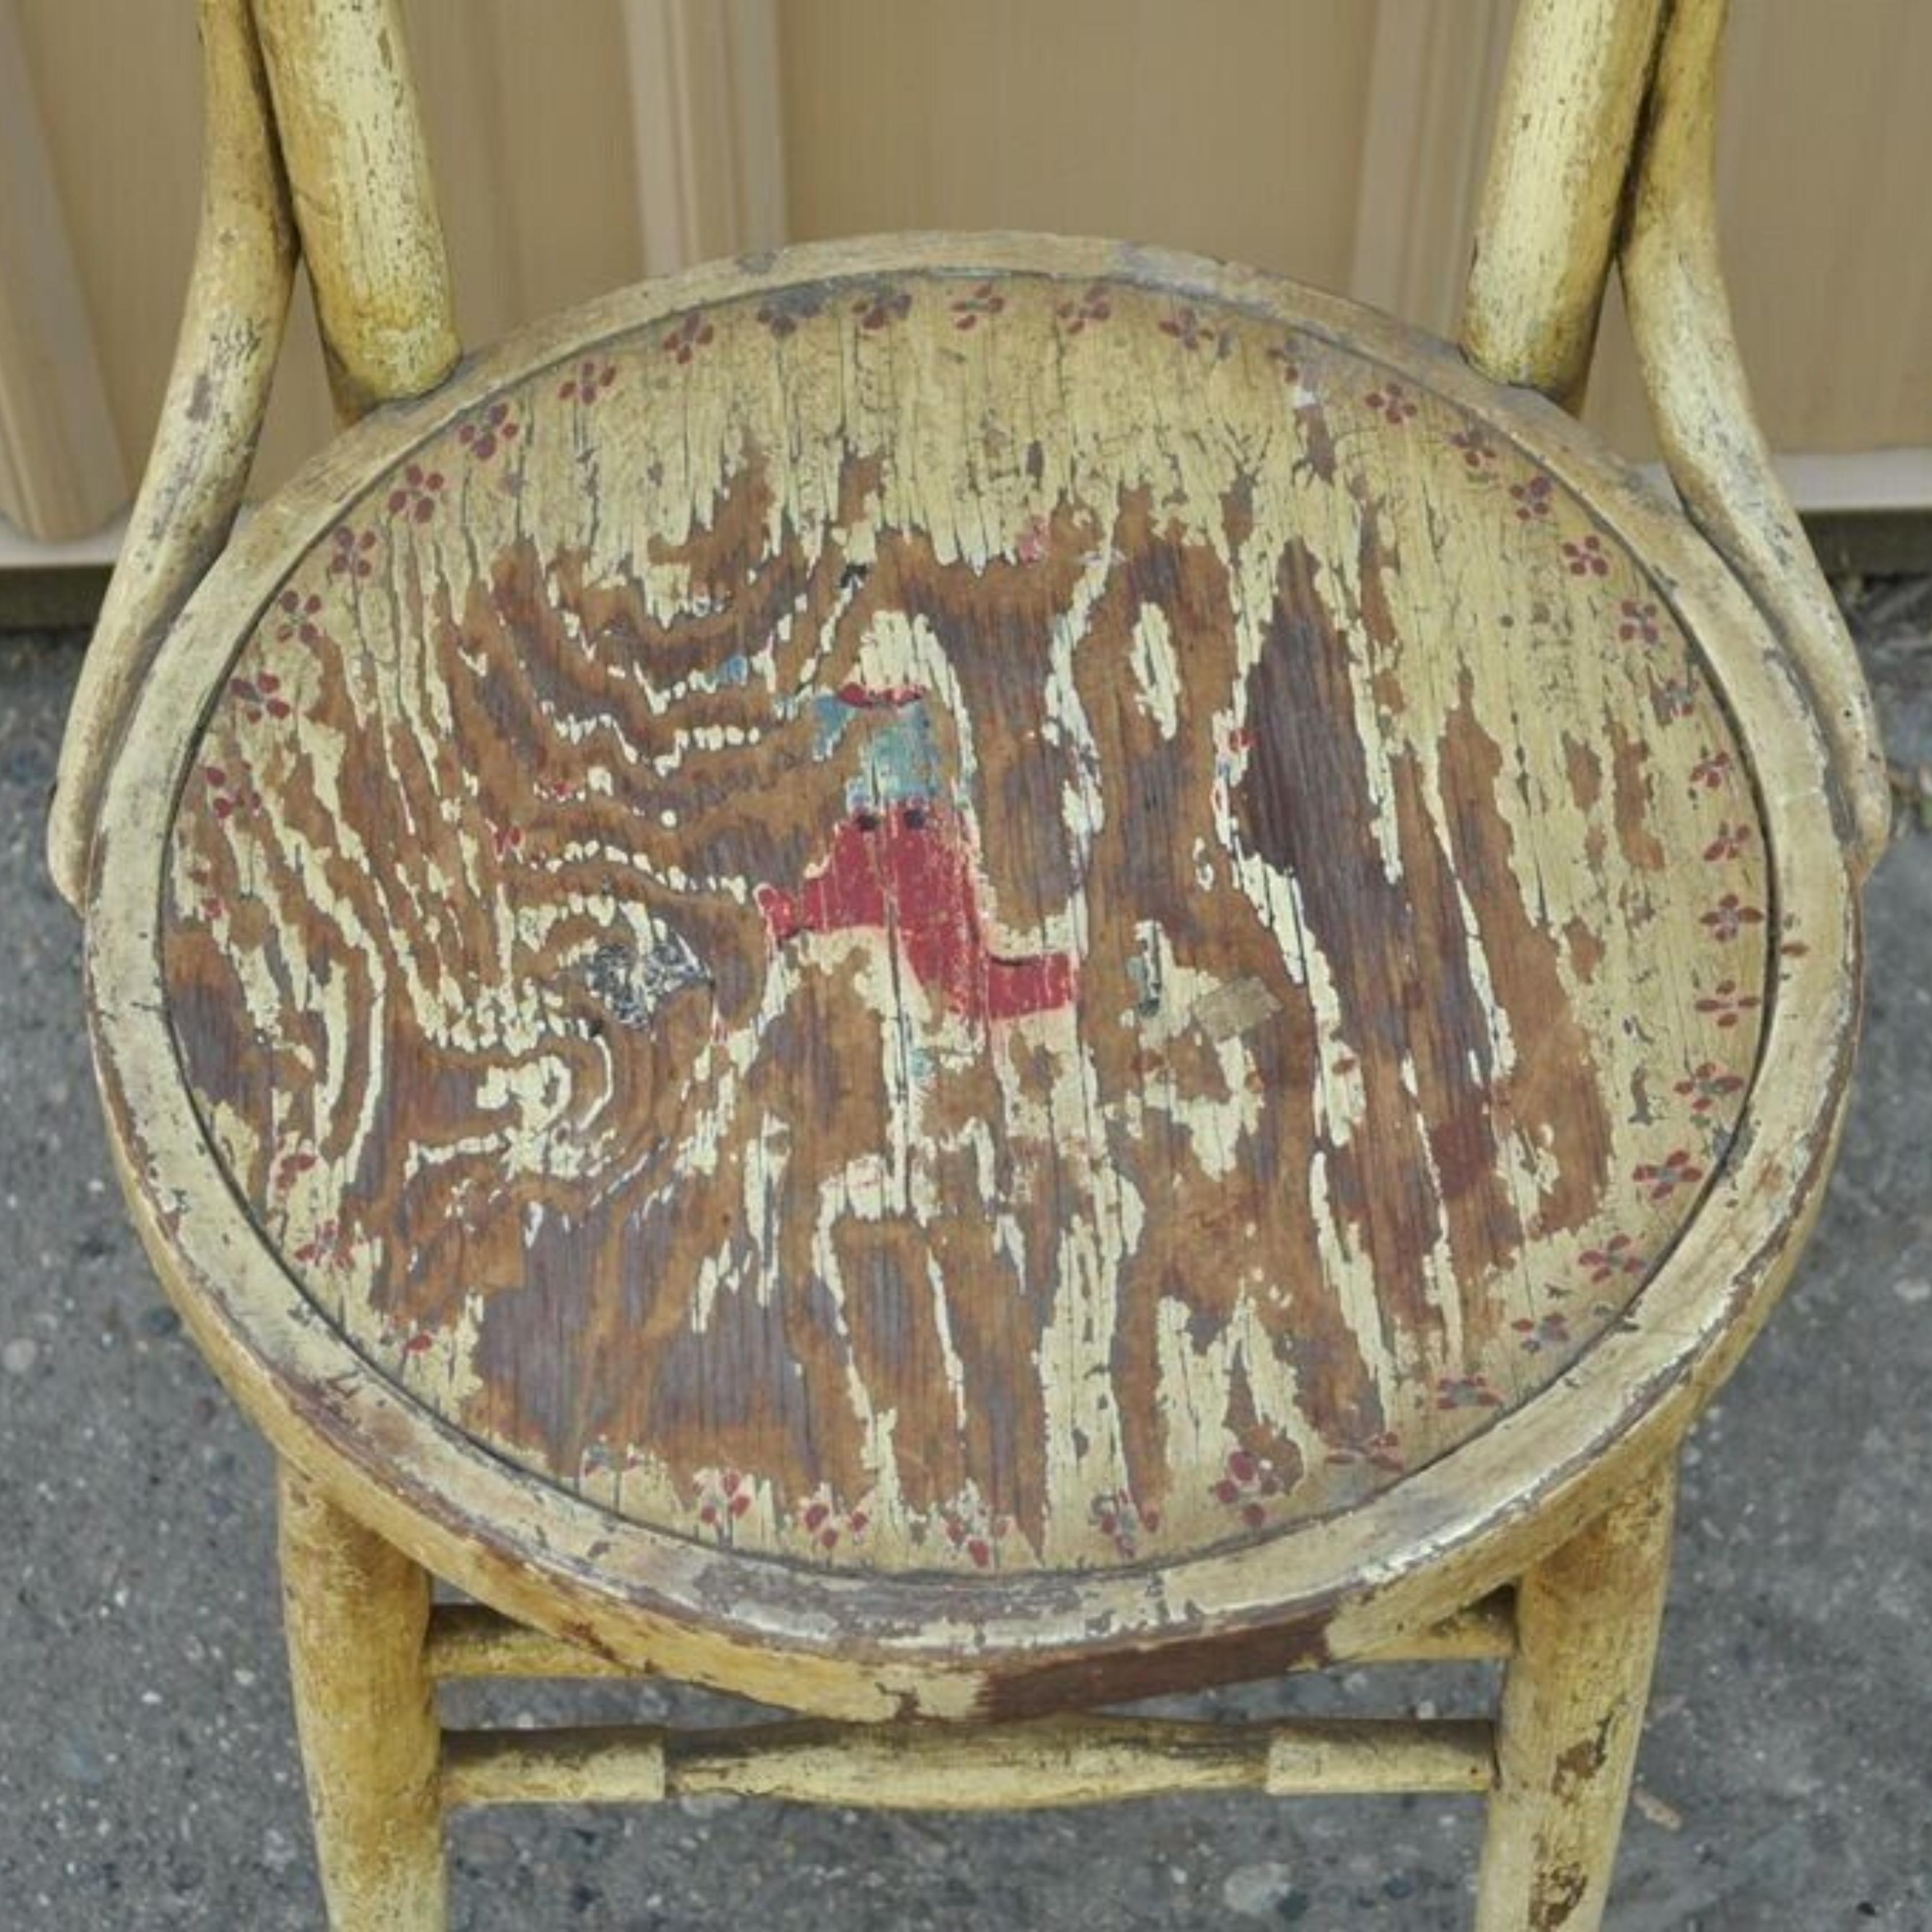 Wood Antique Rustic Primitive Distress Hand Painted Nursery Rhymes Side Accent Chair For Sale